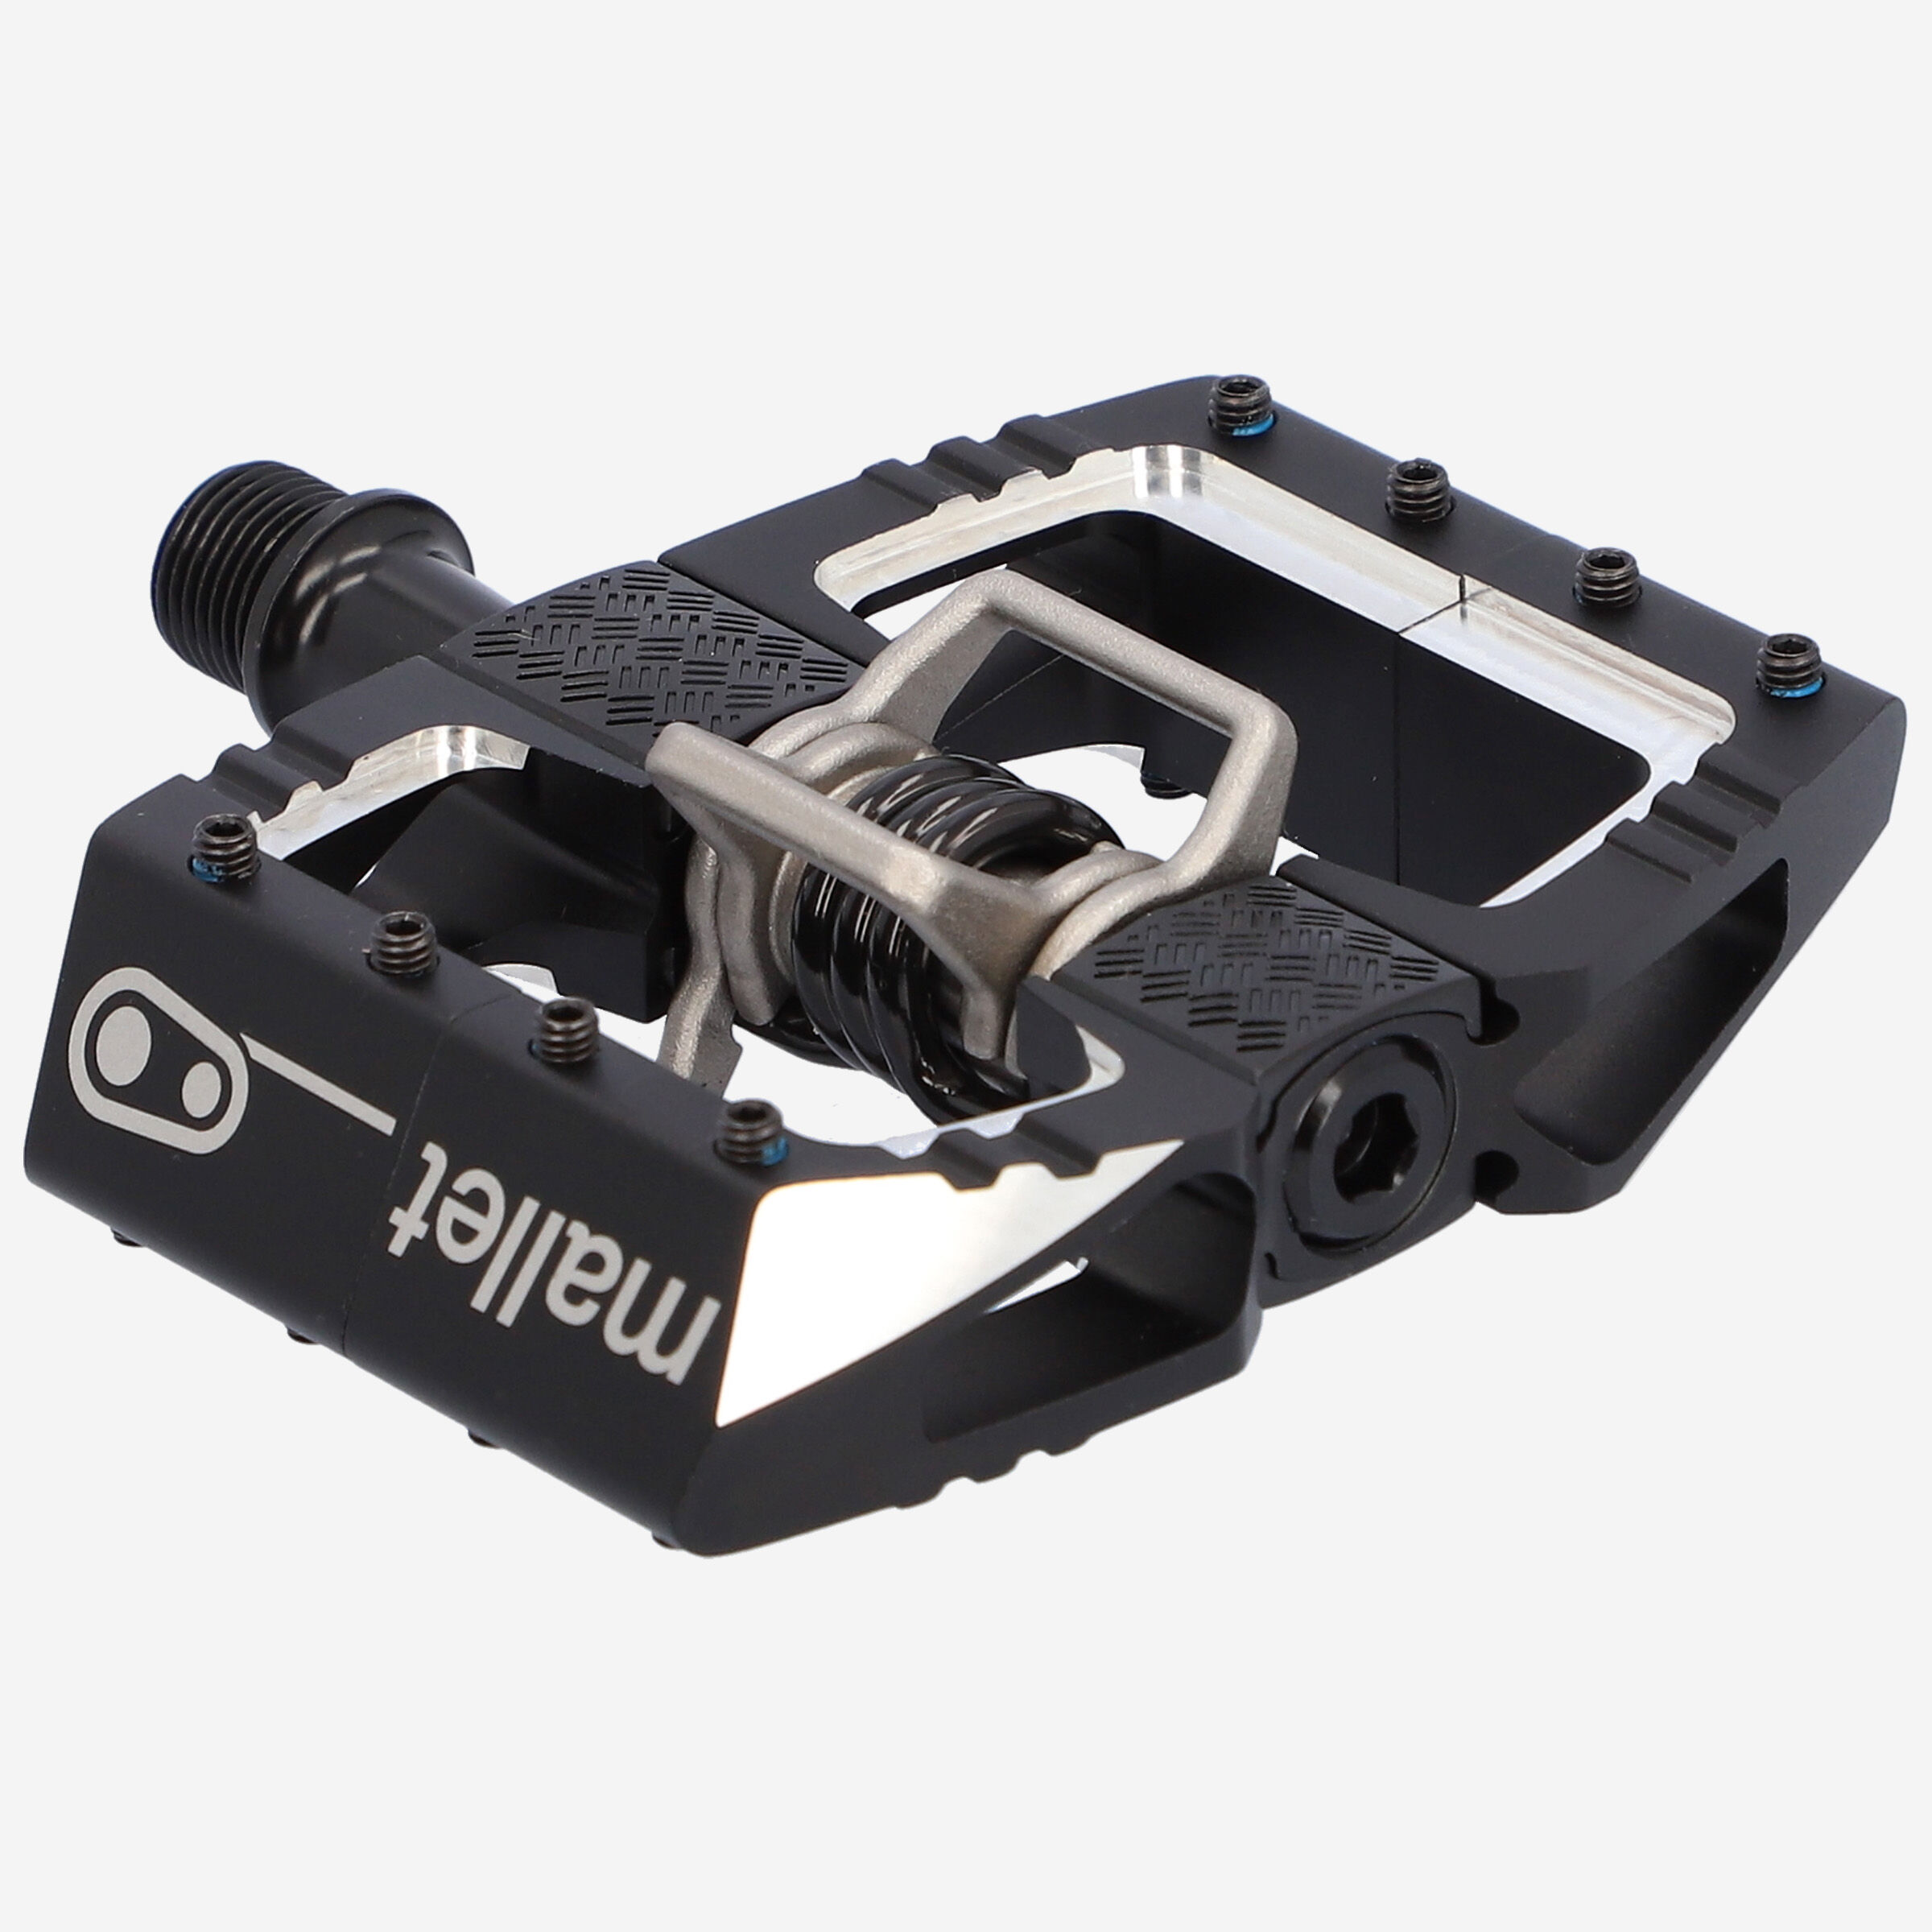 Crankbrothers Mallet DH Pedals | CANYON EC